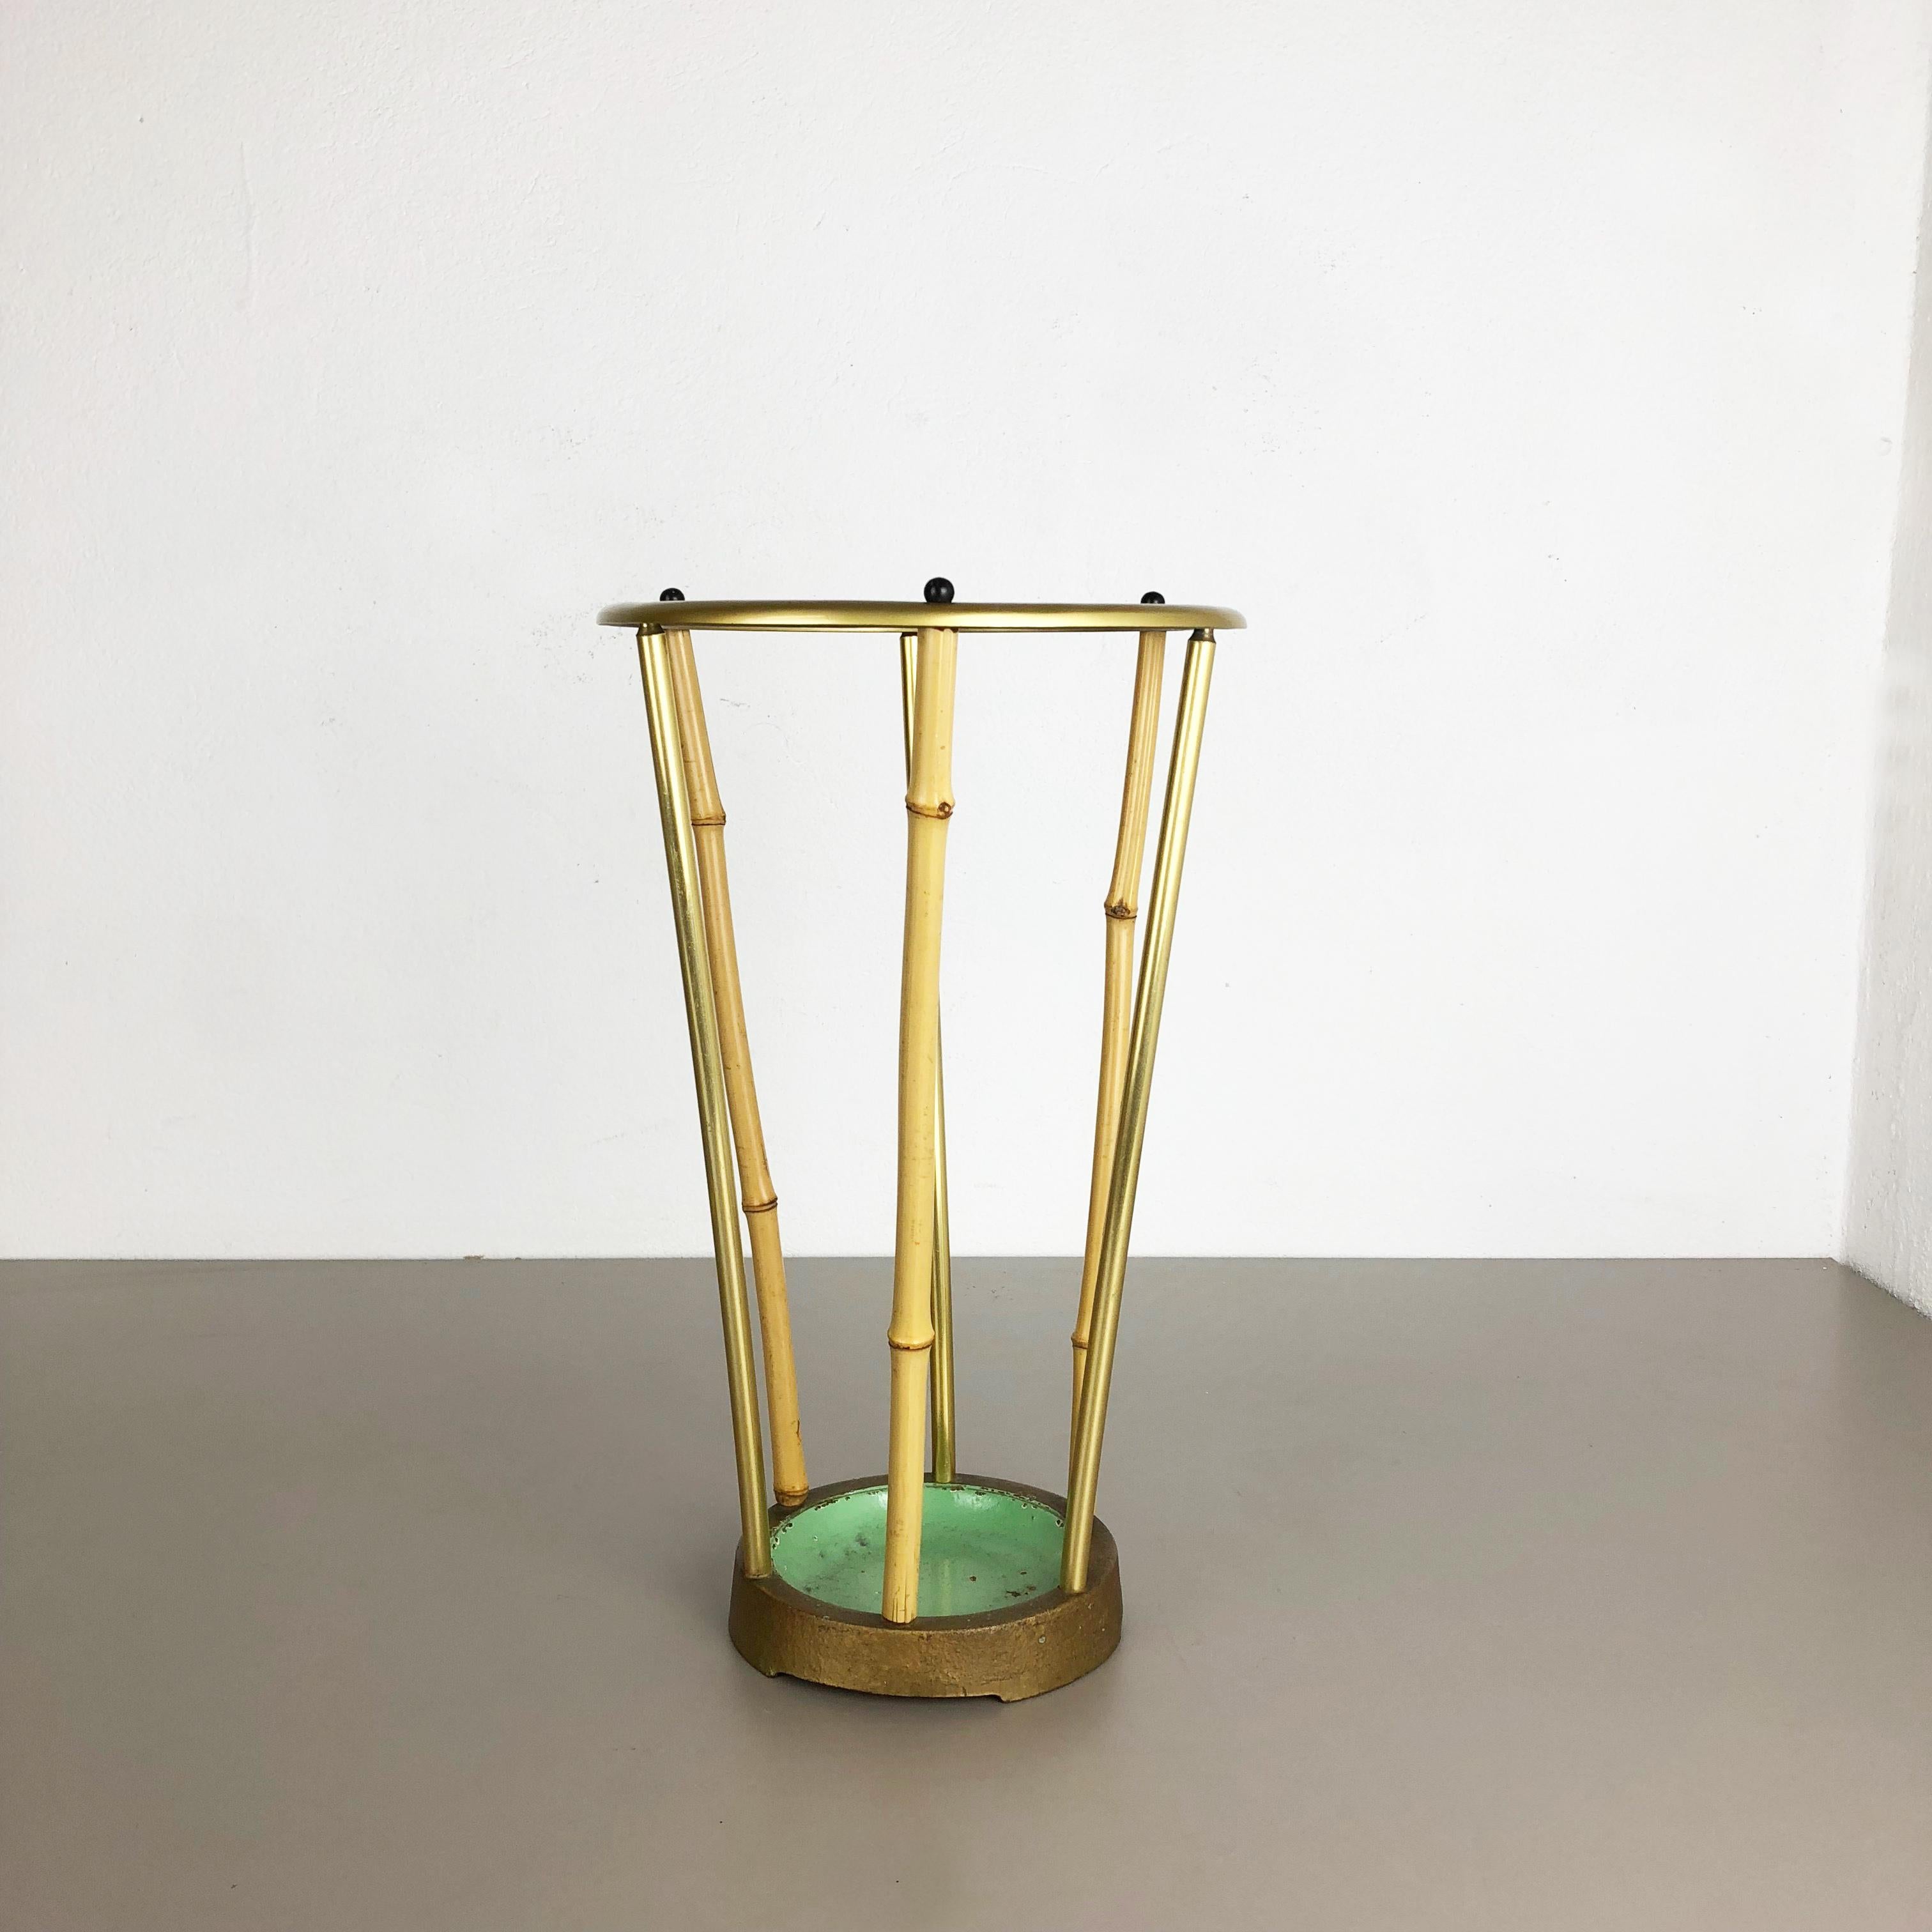 Article:

Midcentury umbrella stand


Origin:

Germany


Age:

1950s


This original vintage Bauhaus style umbrella stand was produced in the 1950s in Germany. It is made of metal with brass tone finishes upright stands and nice bamboo wood